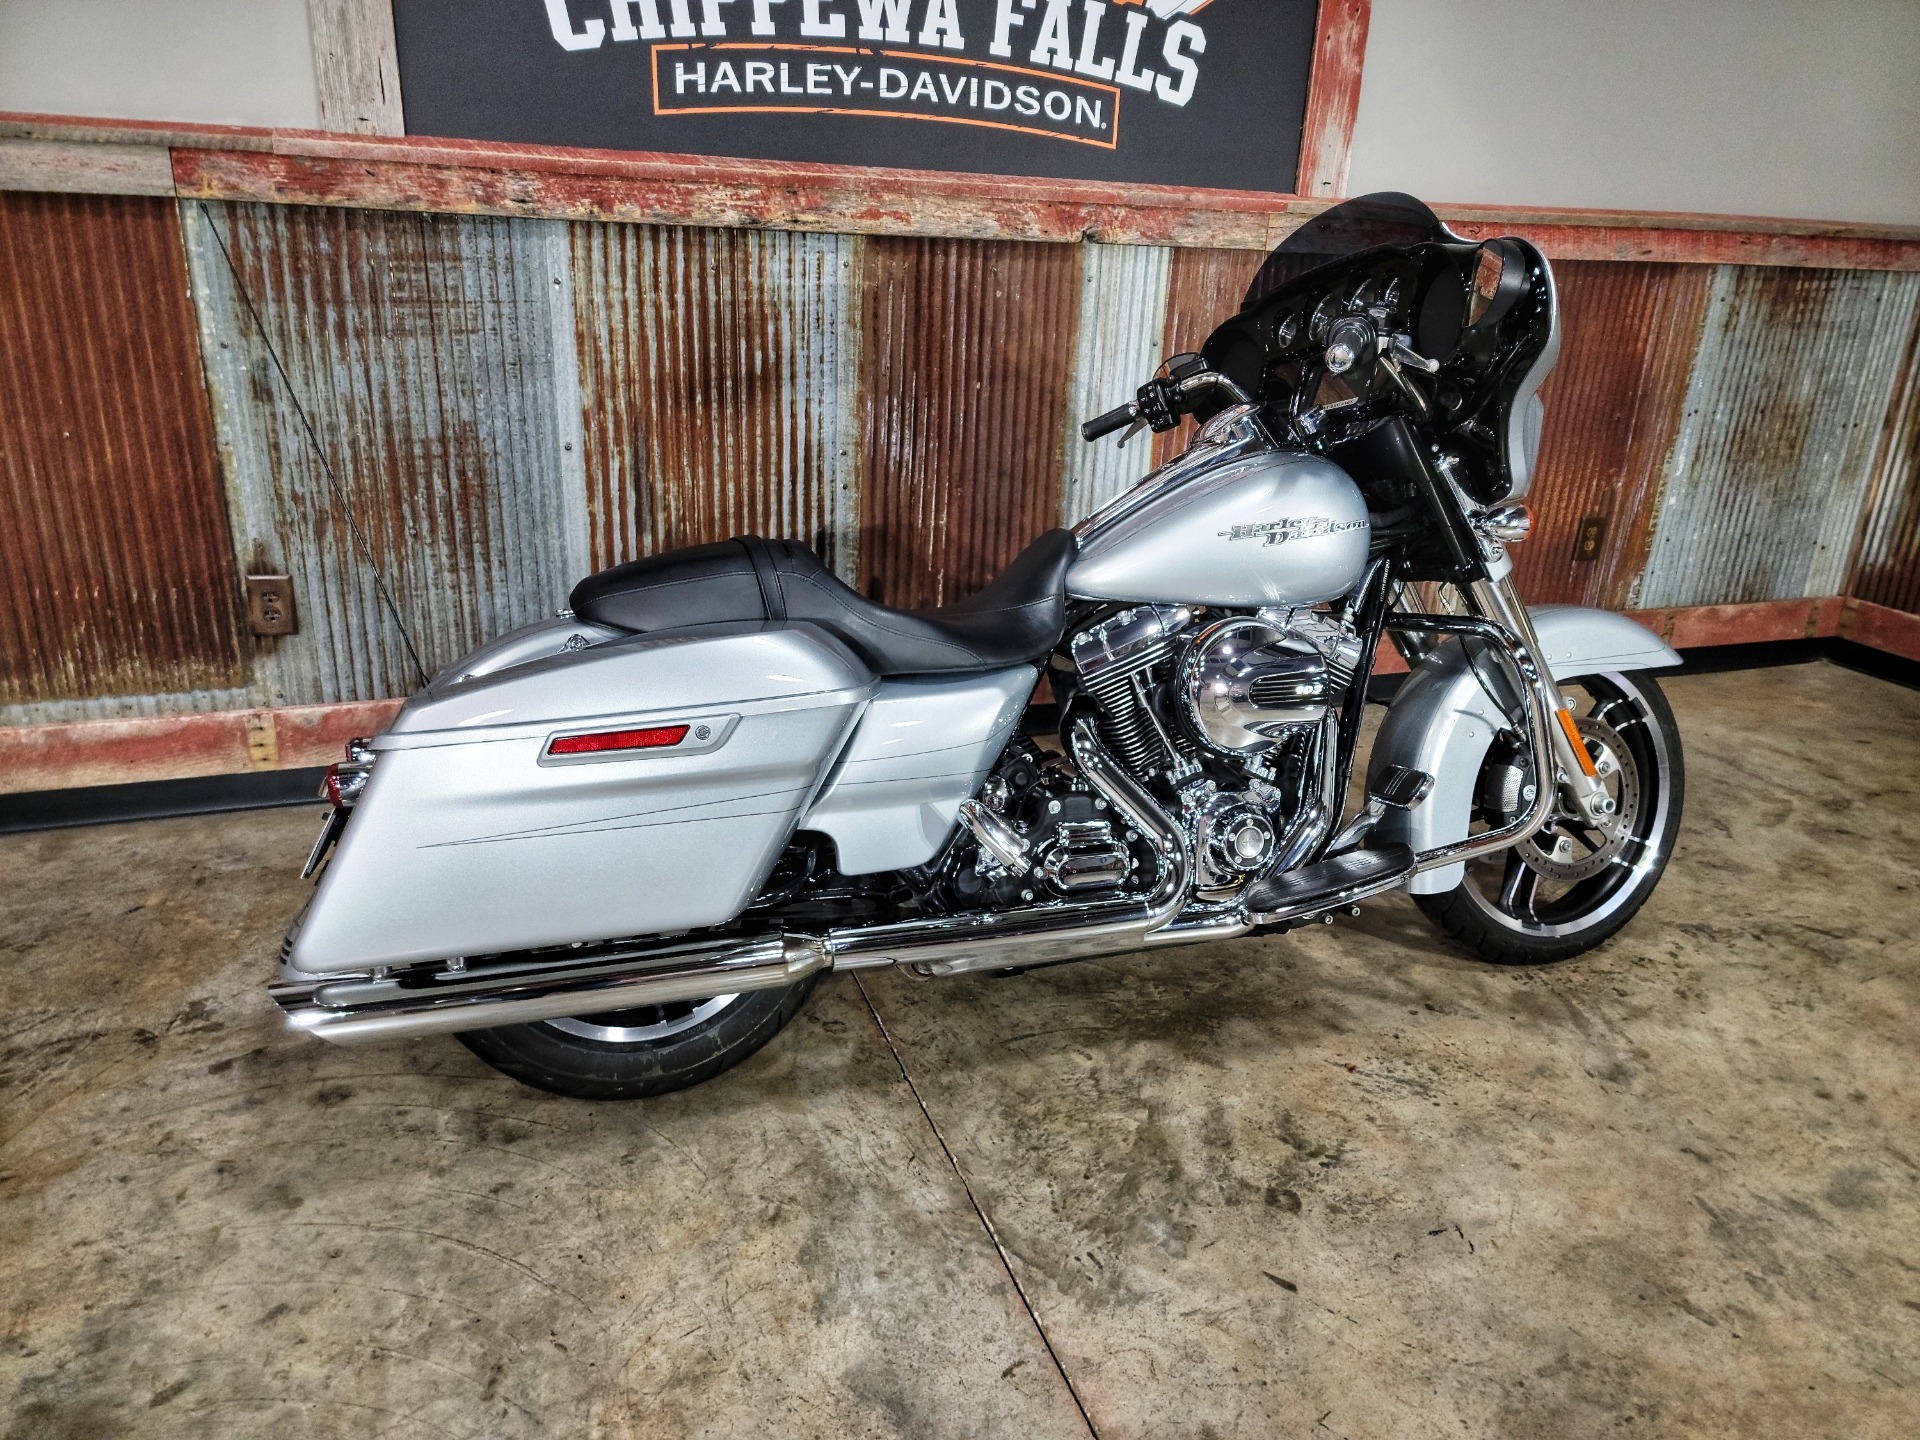 Used 2015 Harley Davidson Street Glide Special Brilliant Silver Pearl Motorcycles In Chippewa Falls Wi B0546